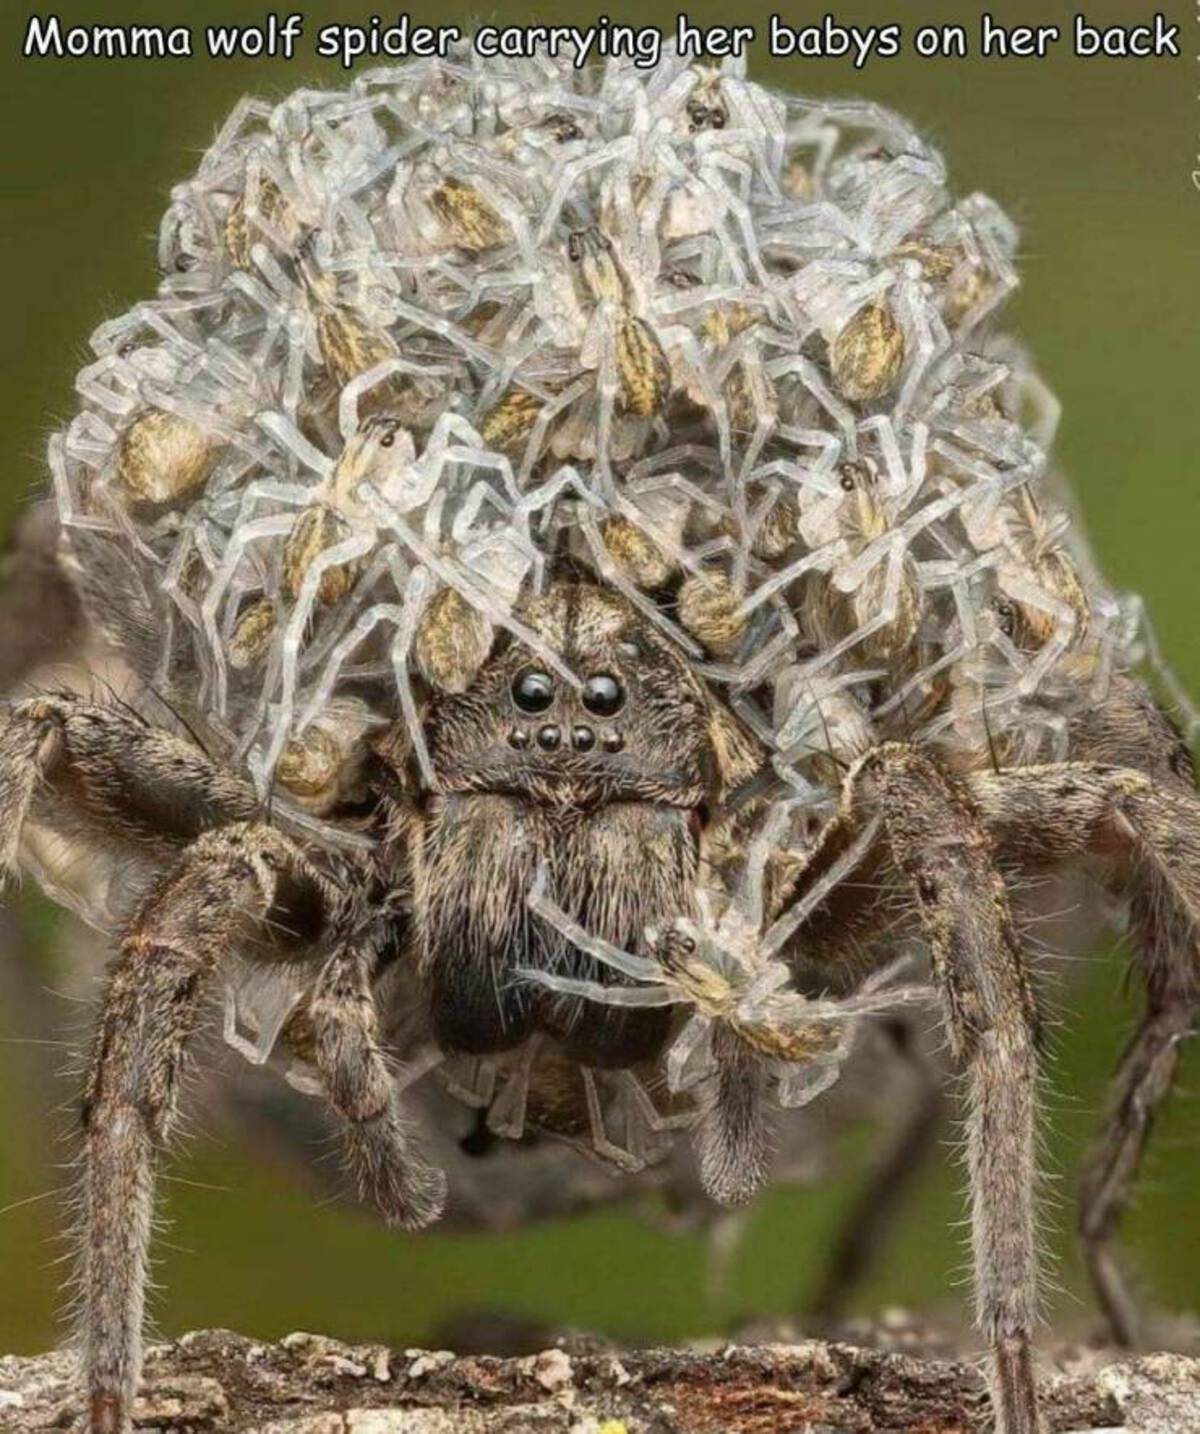 wolf spider - Momma wolf spider carrying her babys on her back